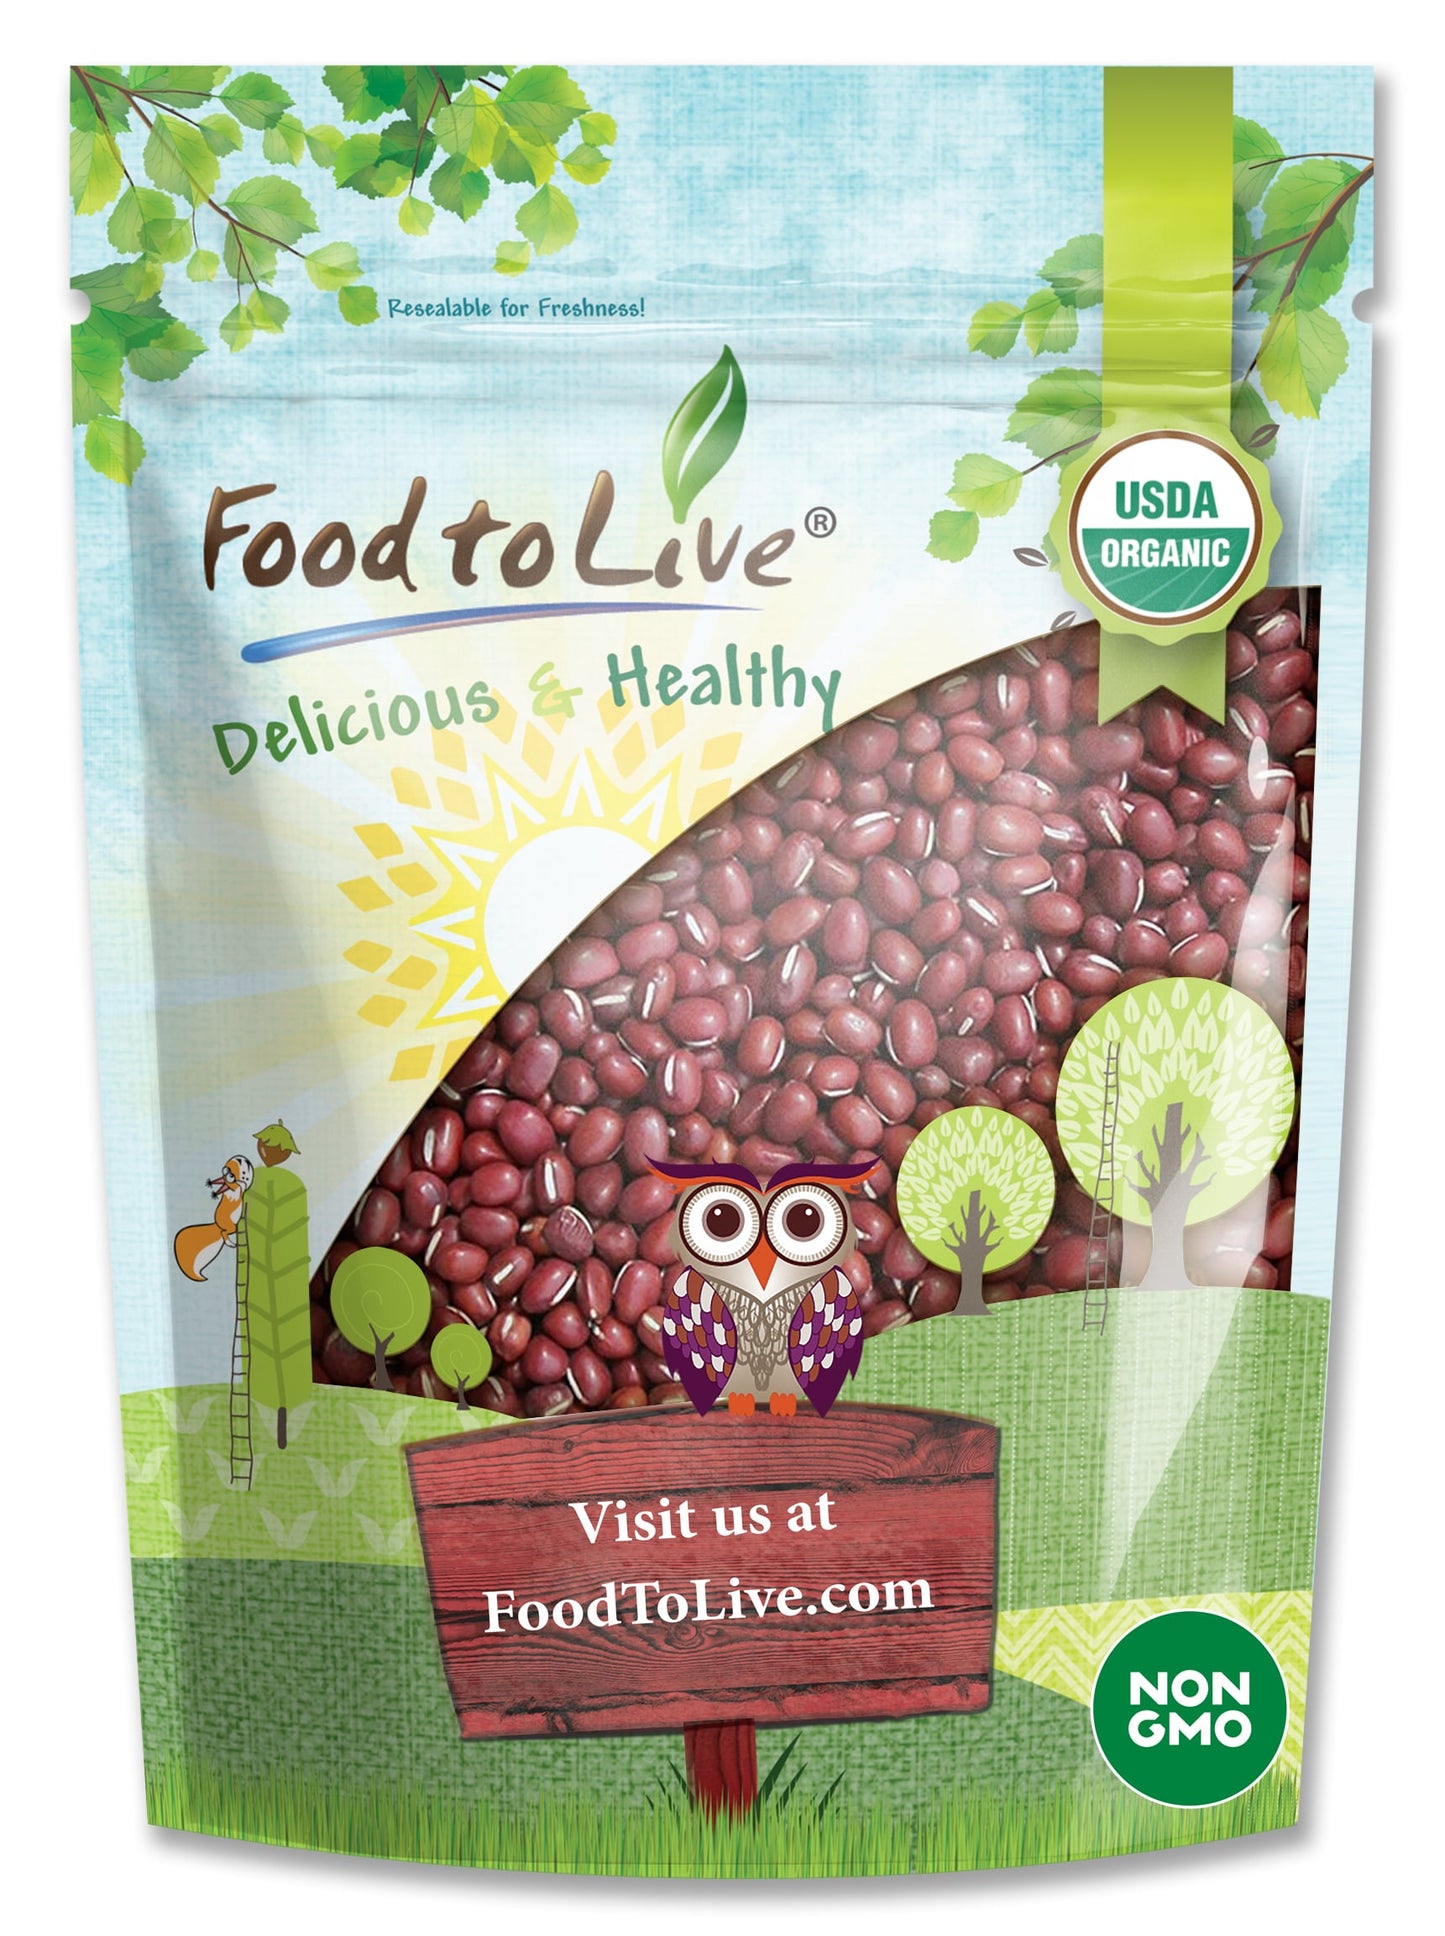 Organic Adzuki Beans — Whole Raw Dried Azuki Beans (Red Mung Beans), Non-GMO, Sproutable, Kosher, Vegan, Bulk. Rich in Minerals, Dietary Fiber and Protein. Perfect for Bean Paste, Soups, and Stews.